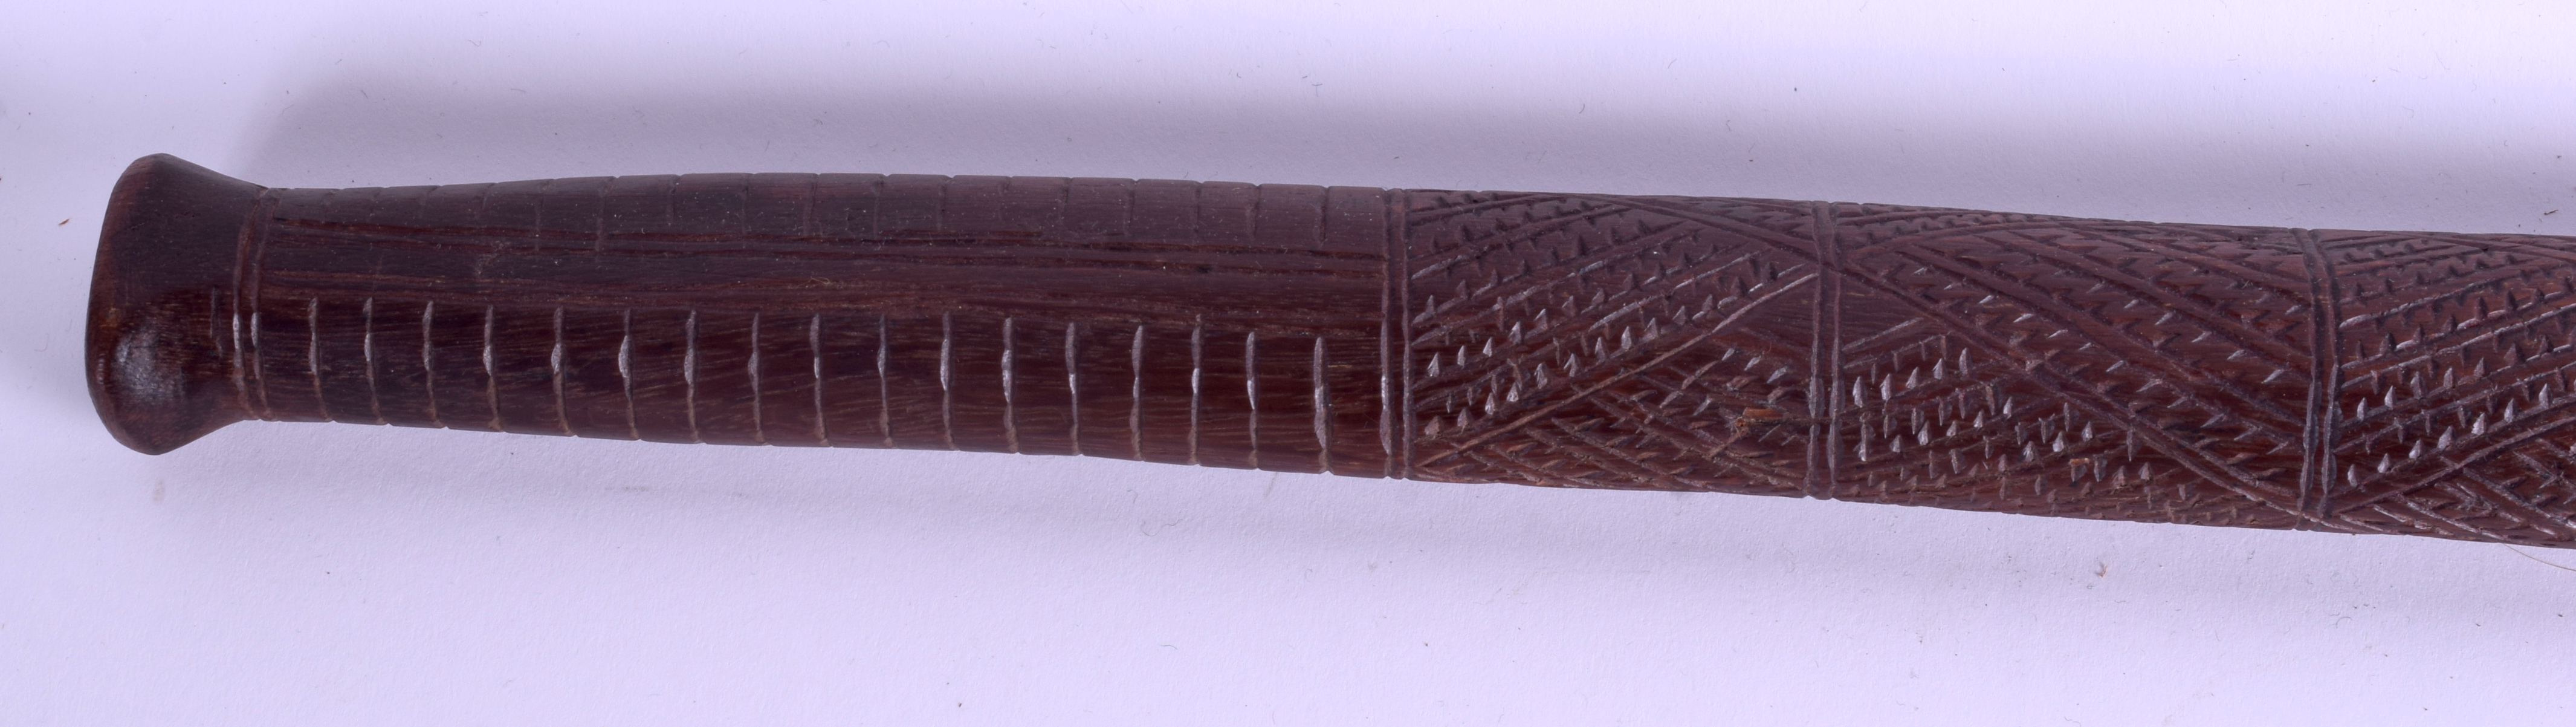 A RARE SAMOAN POLYNESIAN TRIBAL SPIKED WOOD WAR CLUB with zig zag carved handle and barbed rim. 94 - Image 8 of 8